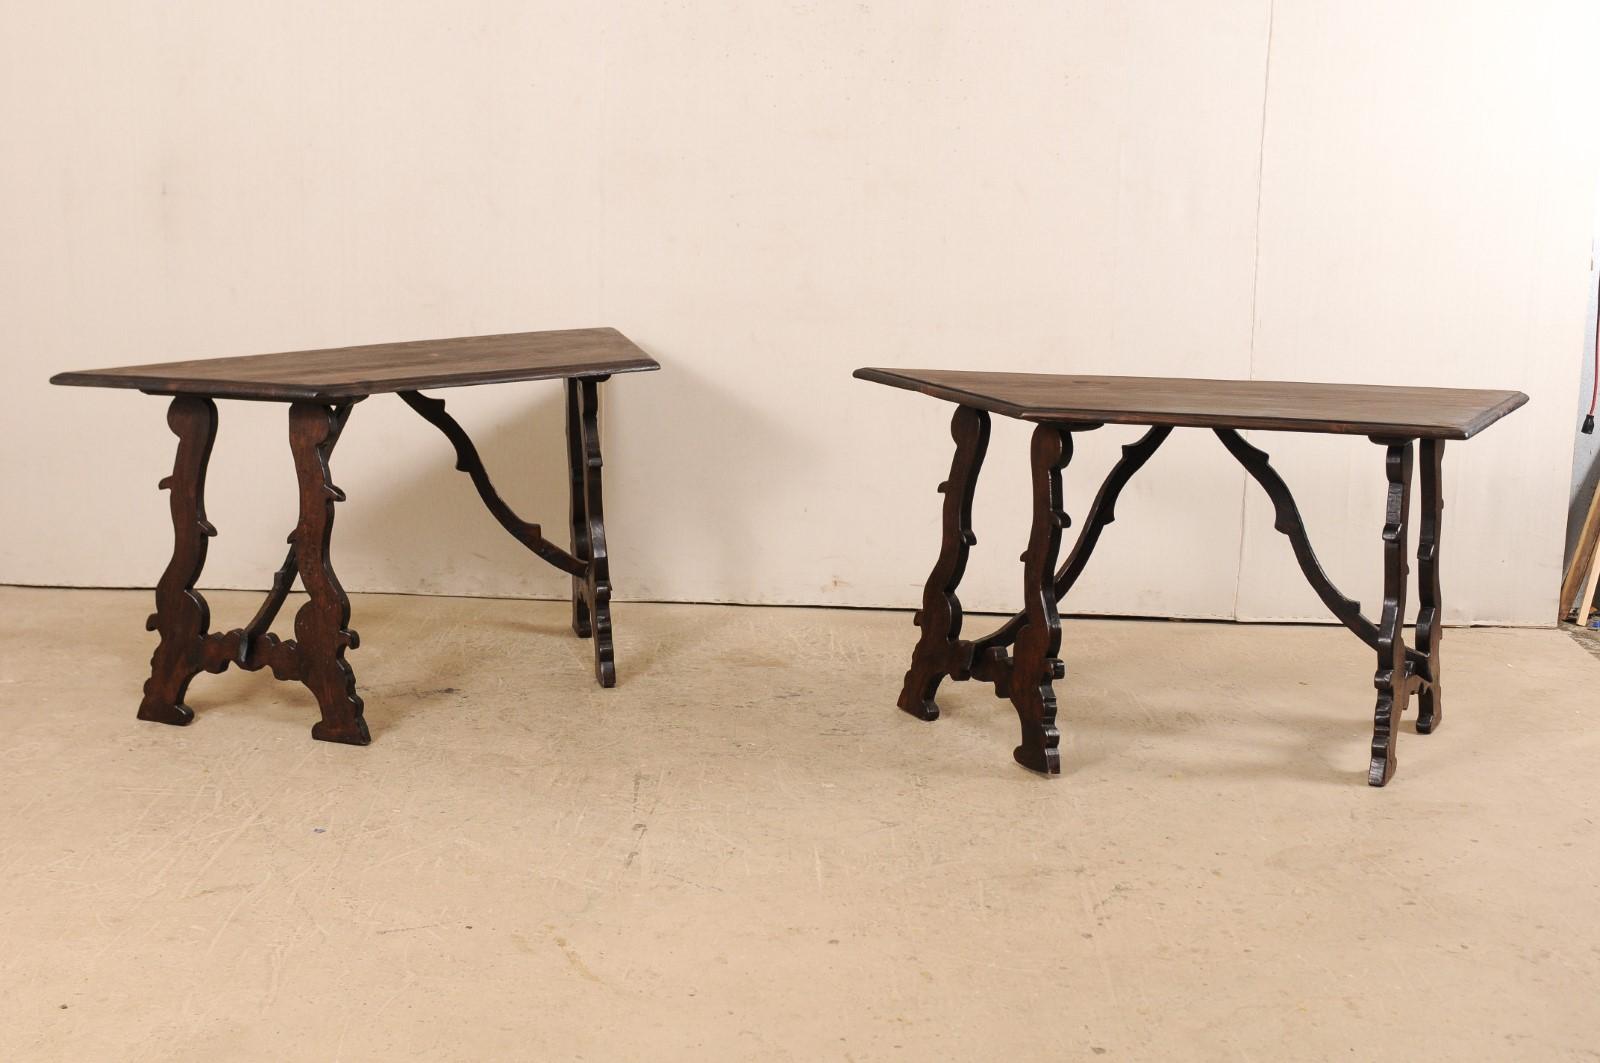 A vintage pair of Italian demilune tables with lyre-shaped legs. This pair of demilune tables from Italy each feature a halved-octagon shaped top which is raised upon a pair of sinuously carved and canted lyre-legs. The lyre legs are braced with two